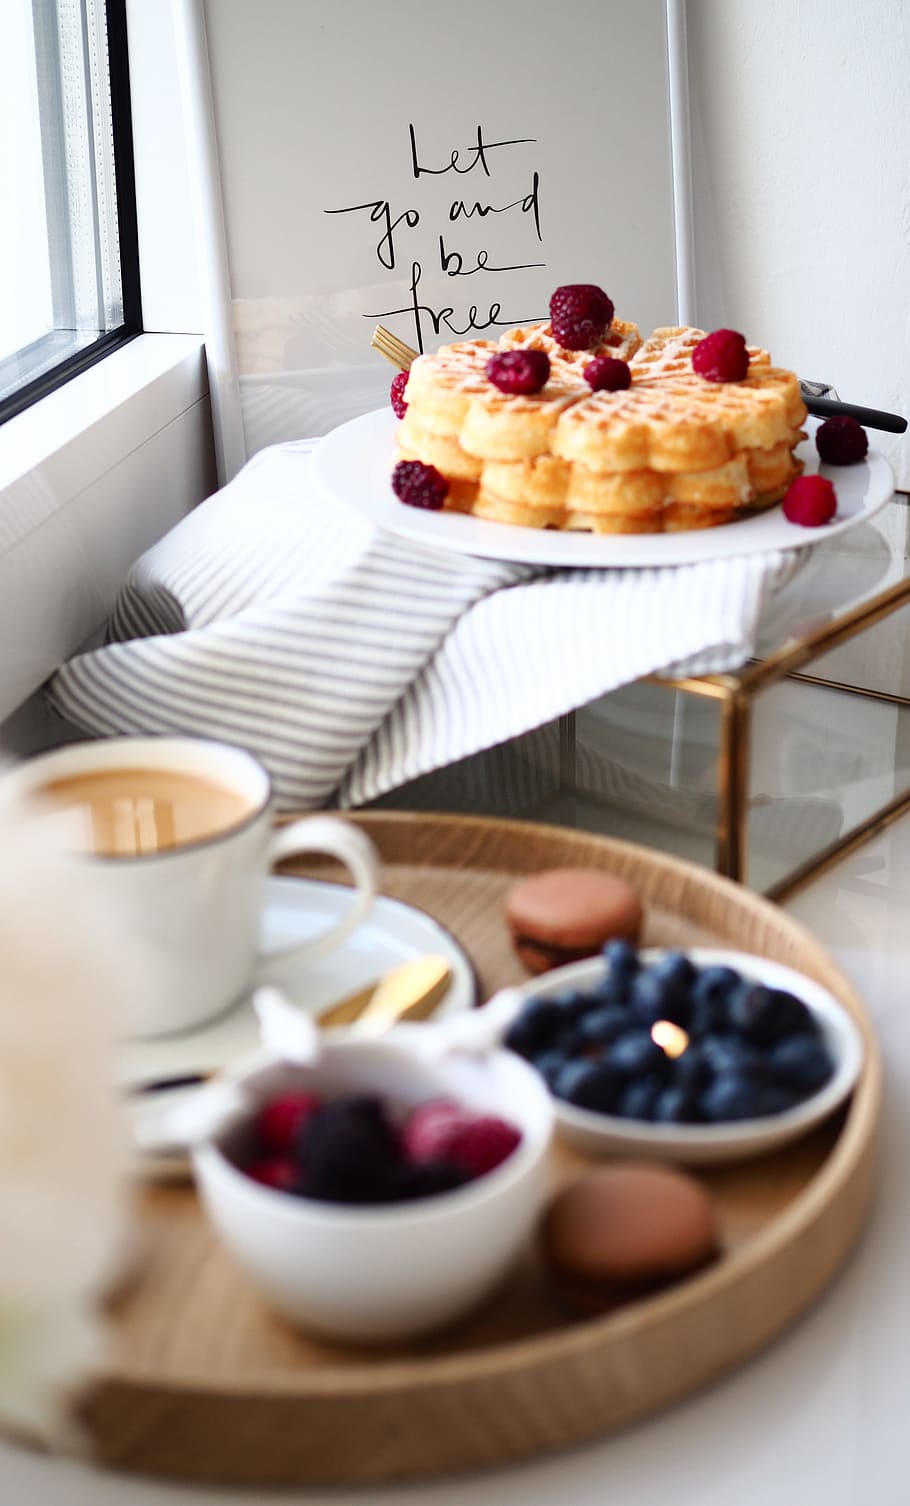 shallow focus photography of waffles with raspberries, breakfast